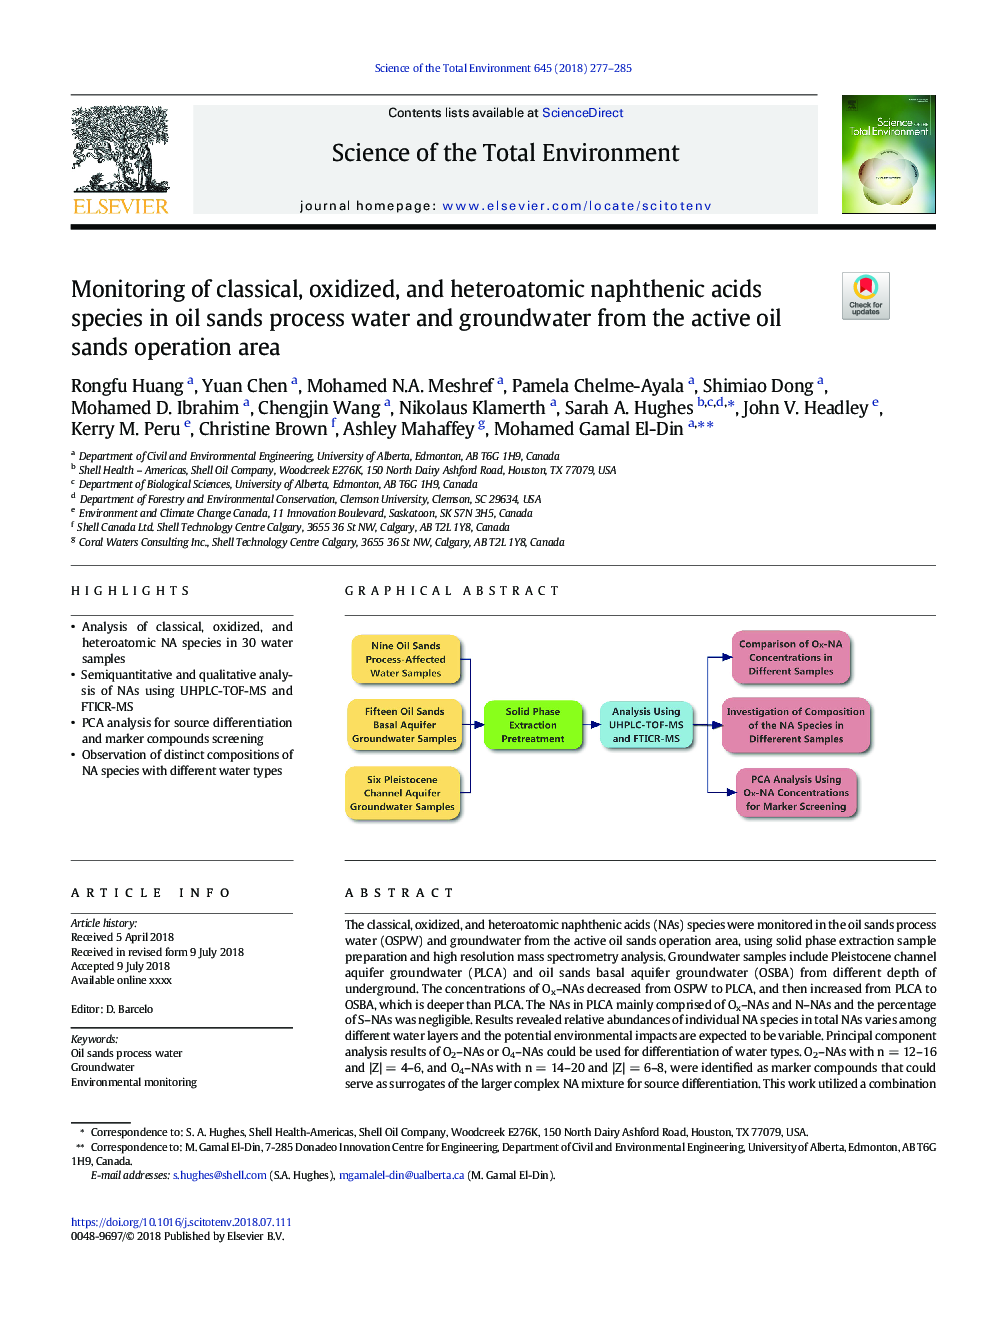 Monitoring of classical, oxidized, and heteroatomic naphthenic acids species in oil sands process water and groundwater from the active oil sands operation area